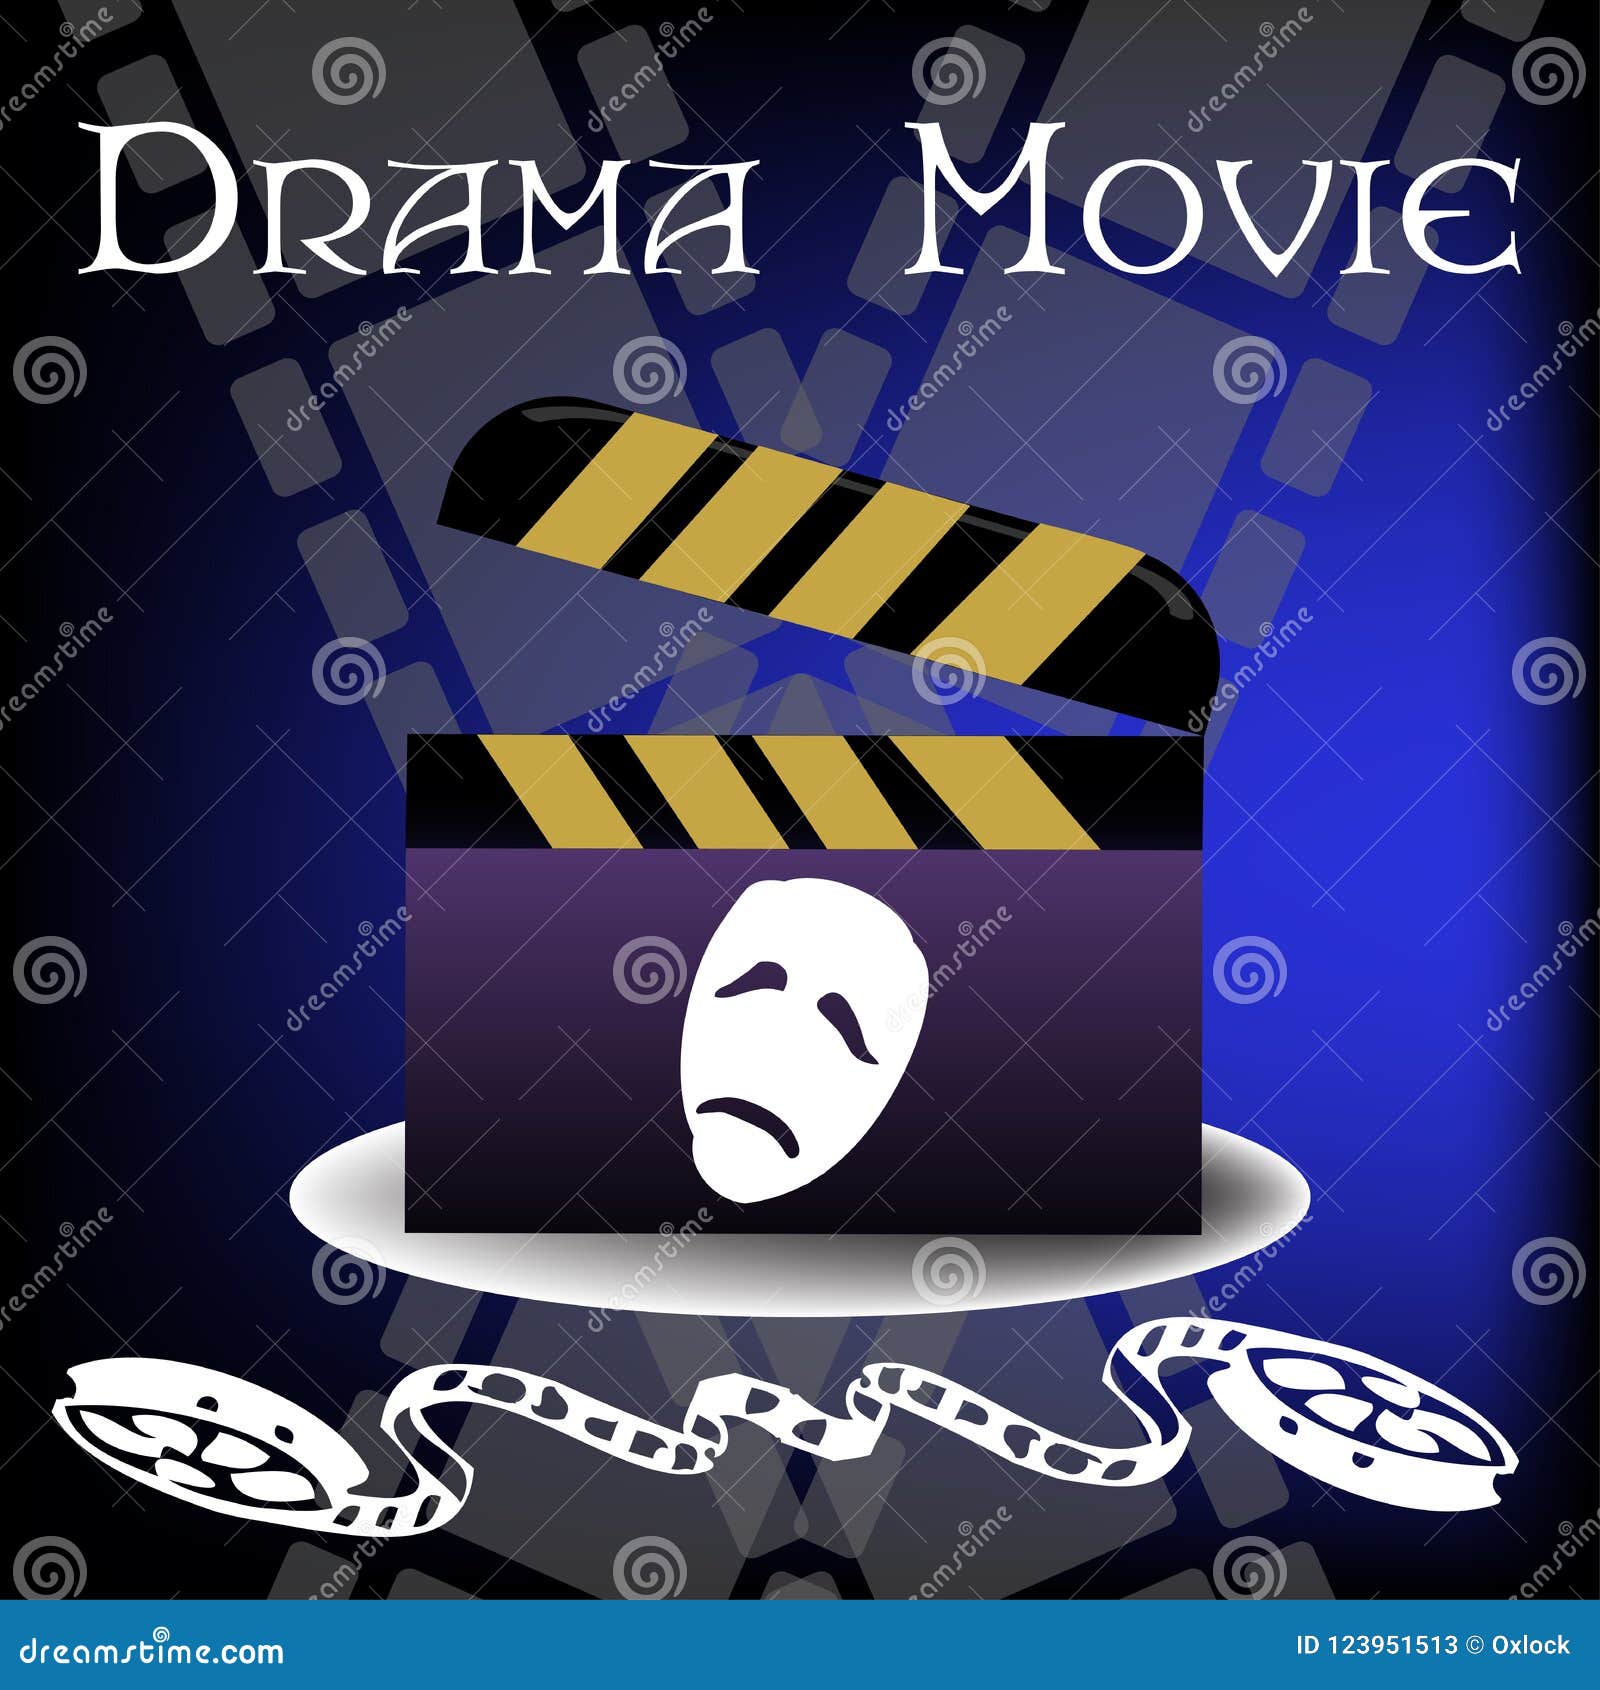 Drama movie concept stock vector. Illustration of producer - 123951513